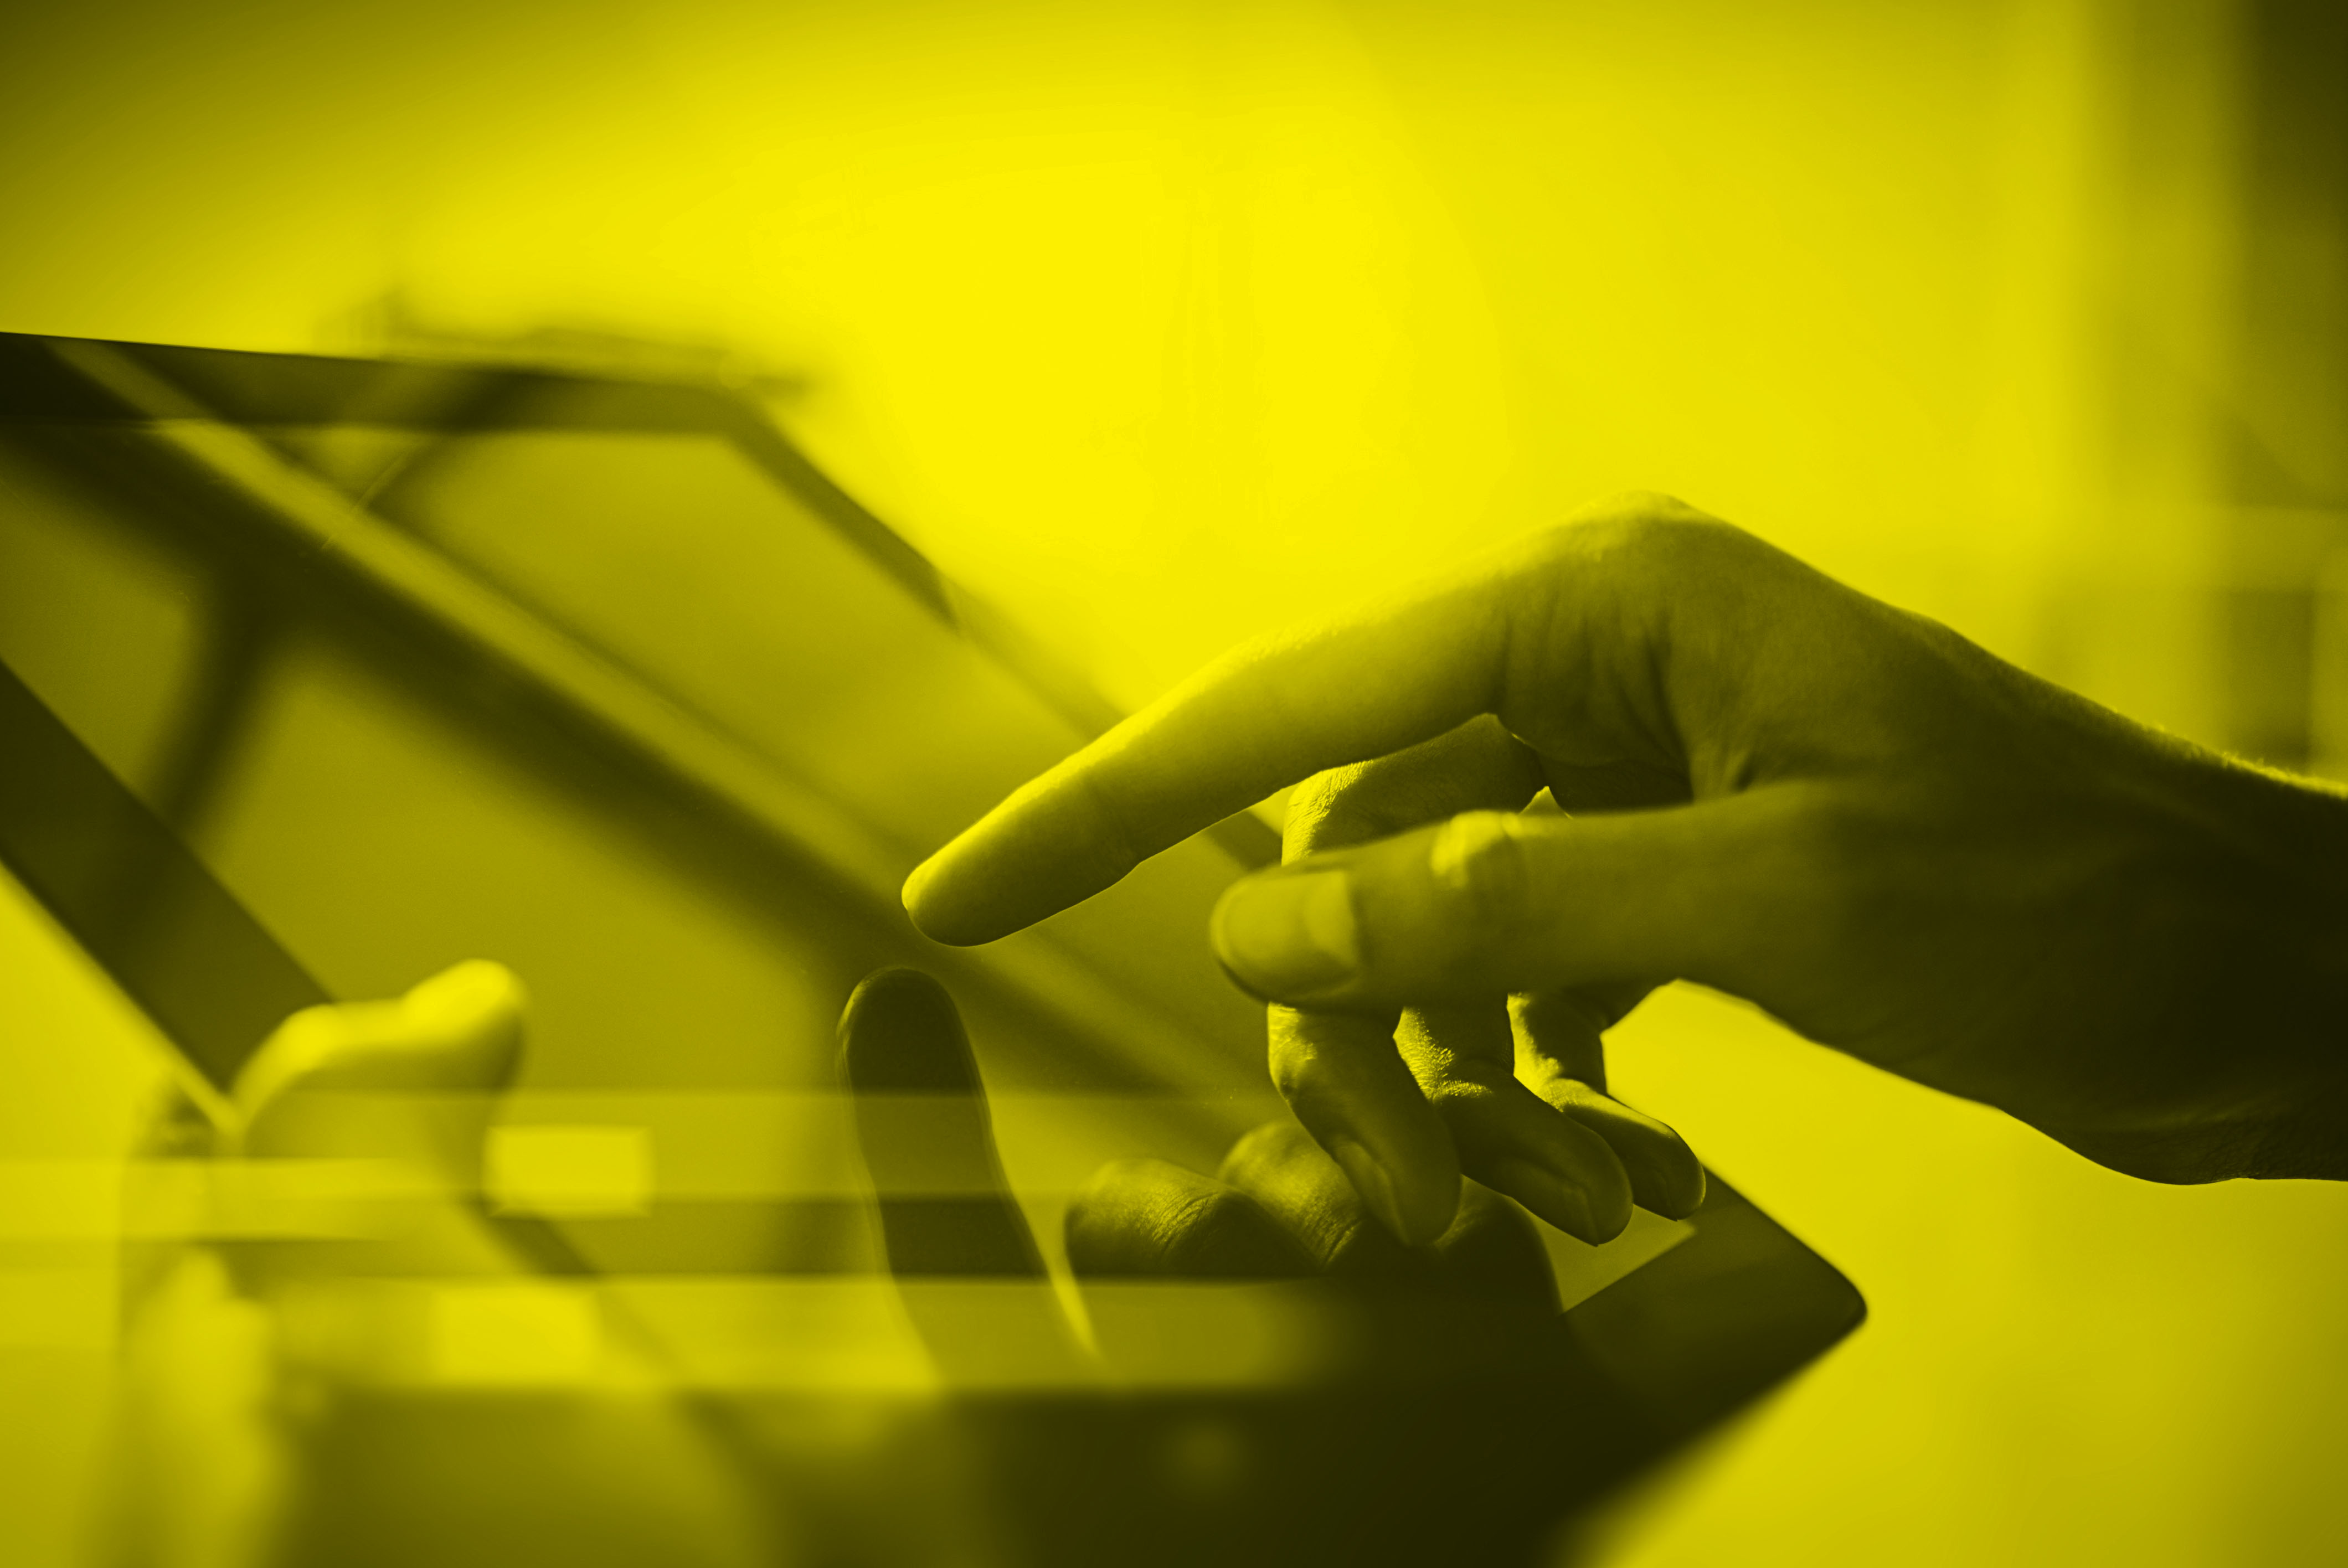 Abstract_Holding Tablet_yellow.jpg